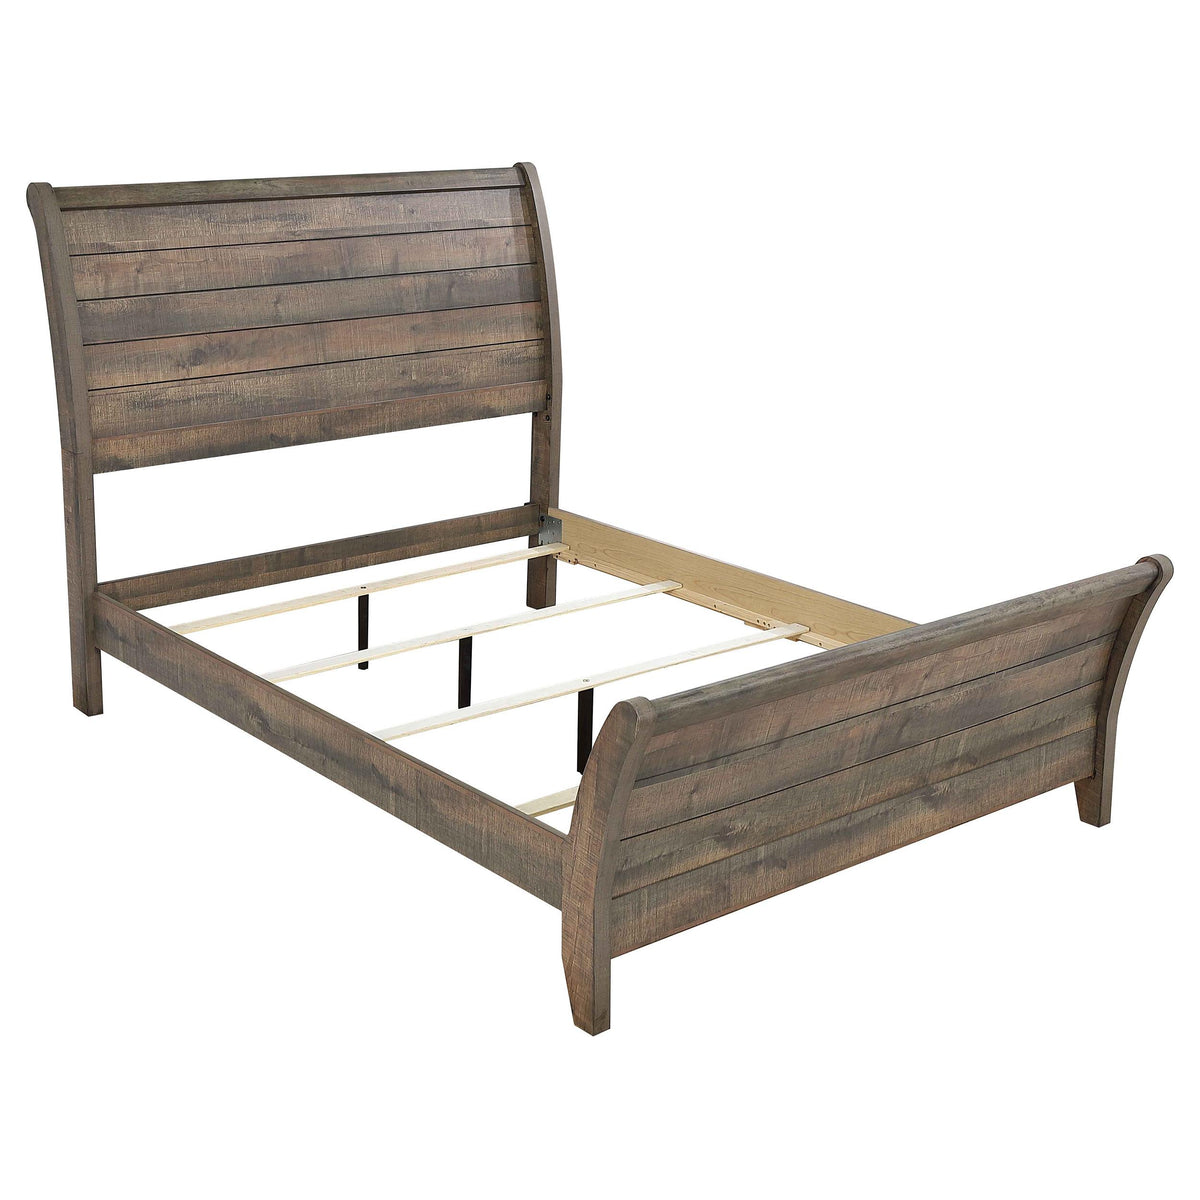 Frederick Queen Sleigh Panel Bed Weathered Oak  Half Price Furniture